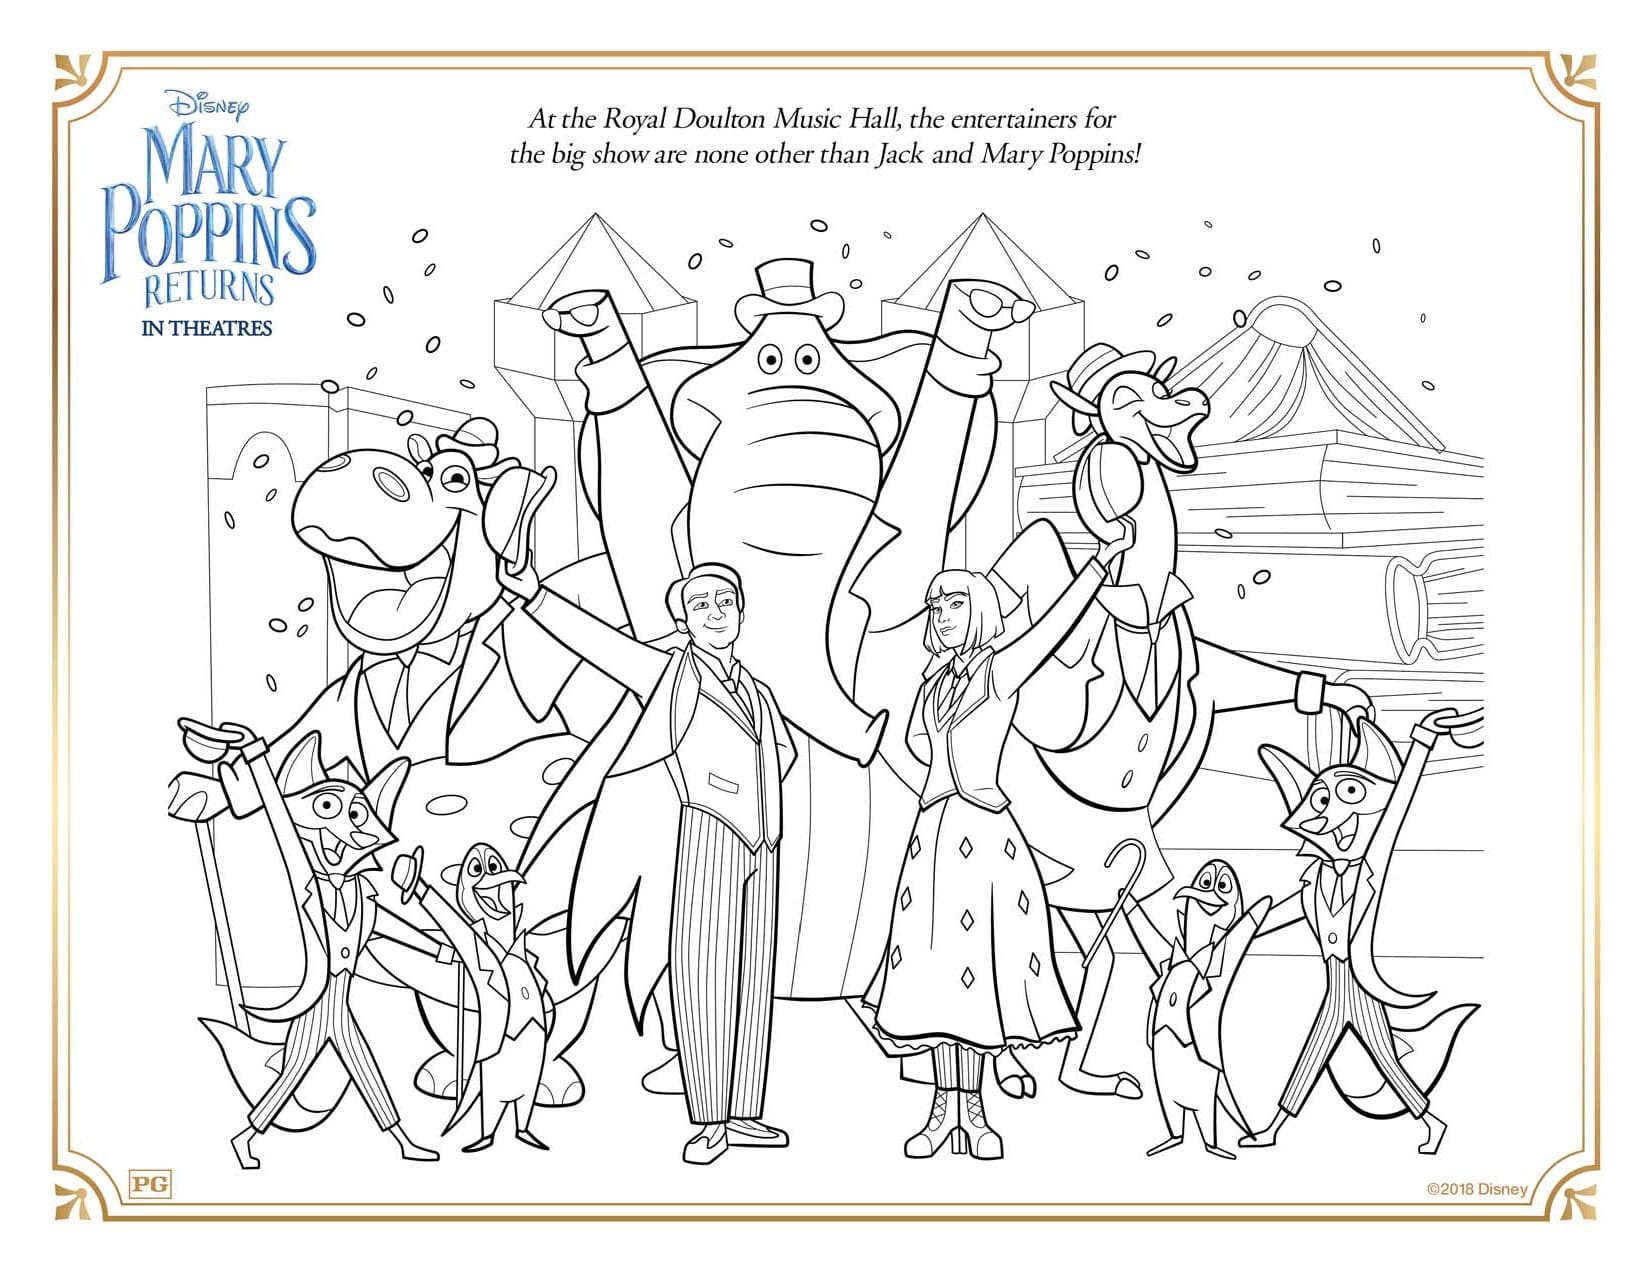 Mary Poppins Returns Jack and Mary Poppins Coloring Pages and Activity Sheets